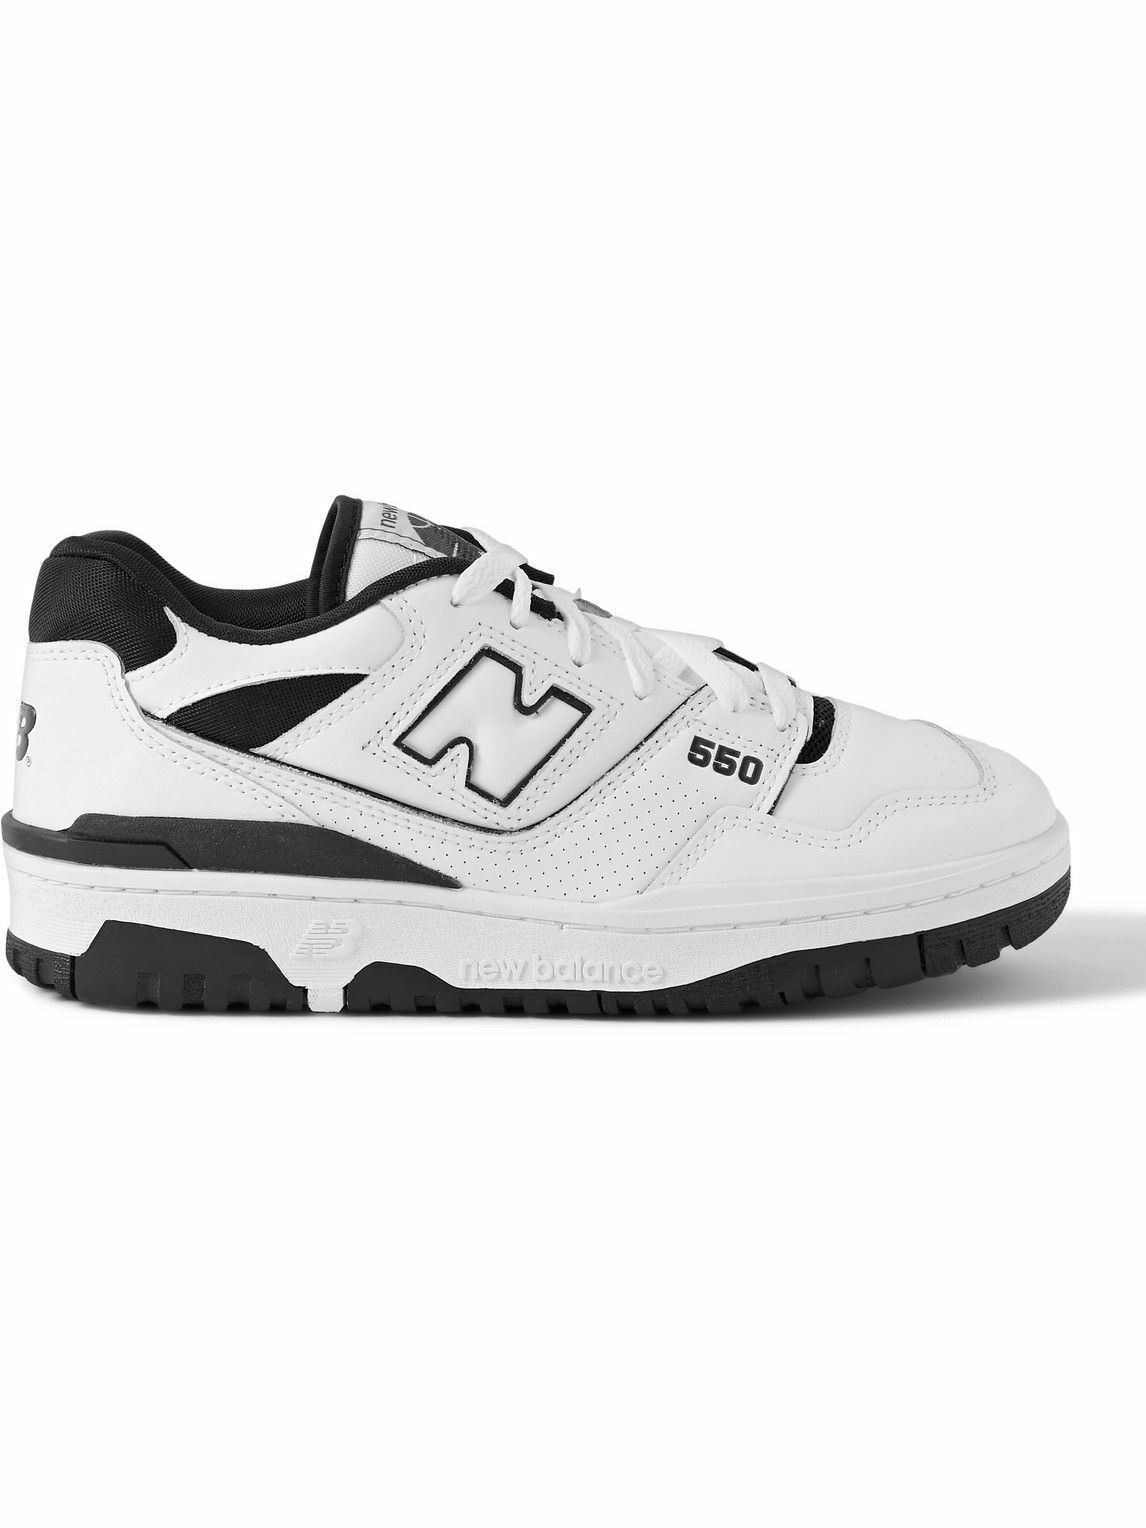 550 Mesh-Trimmed Leather Sneakers - New Balance